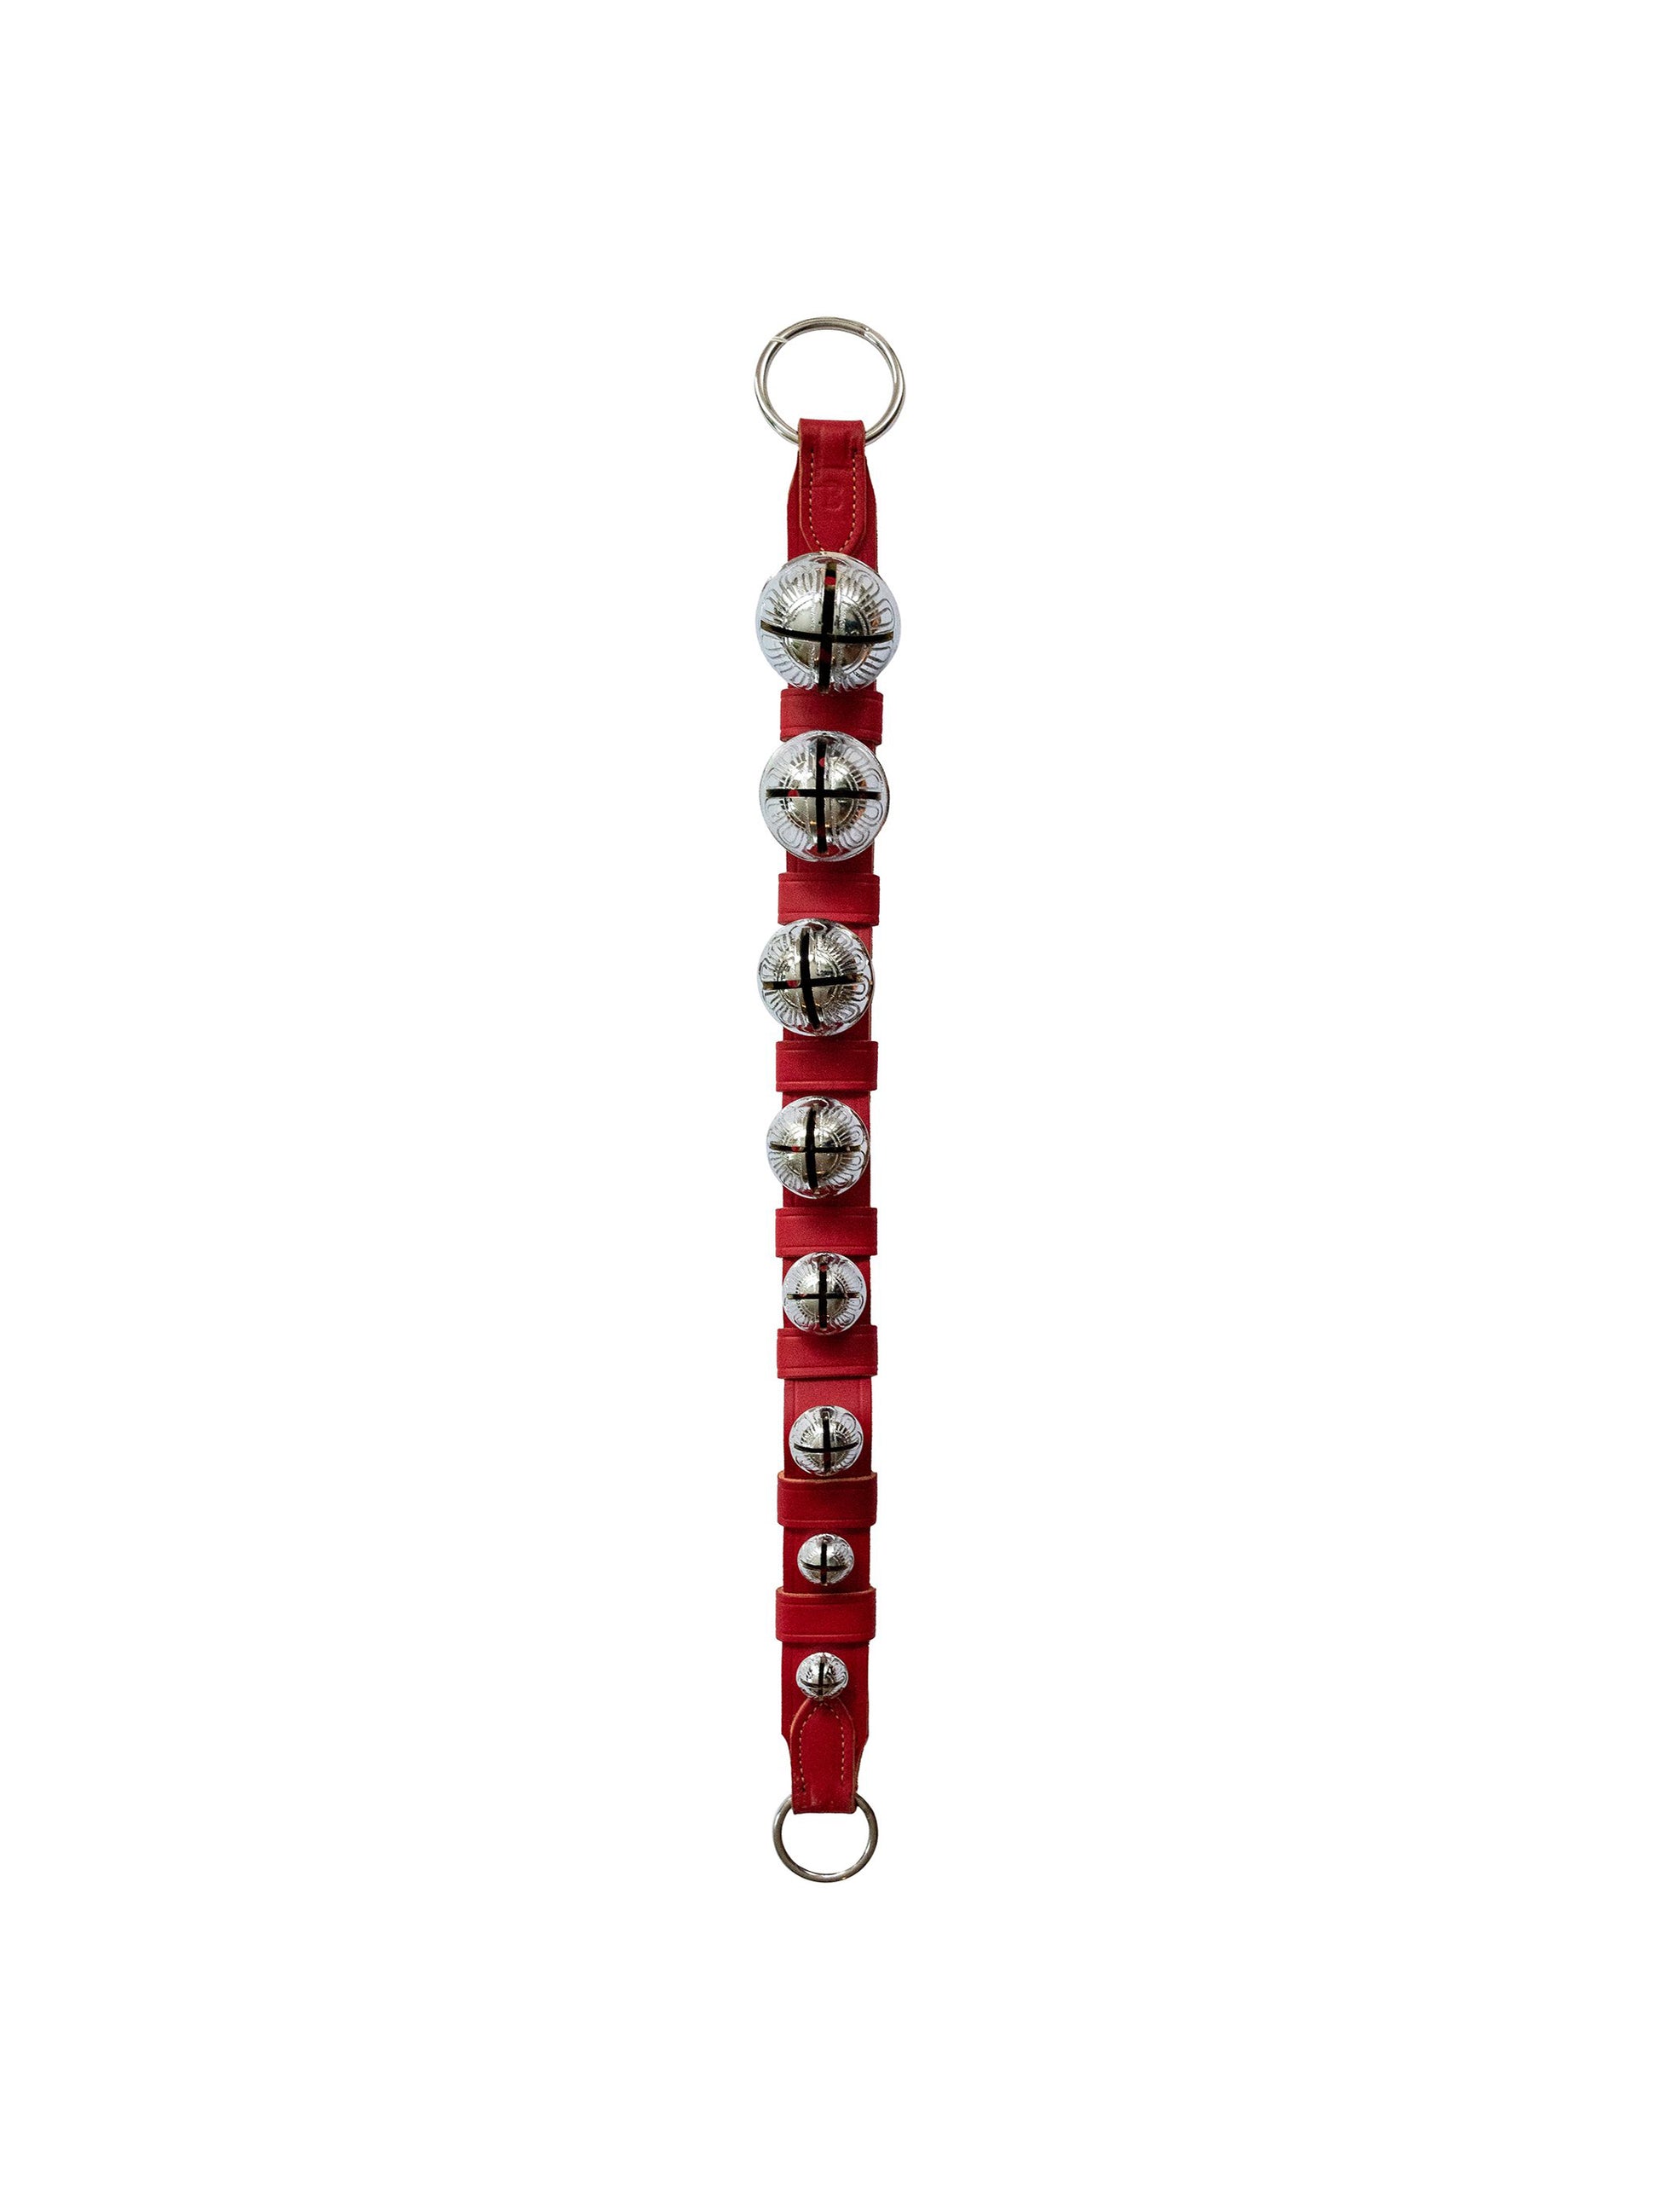 Belsnickel Sleigh Bells Silver Plated Brass Bells with Red Leather Weston Table